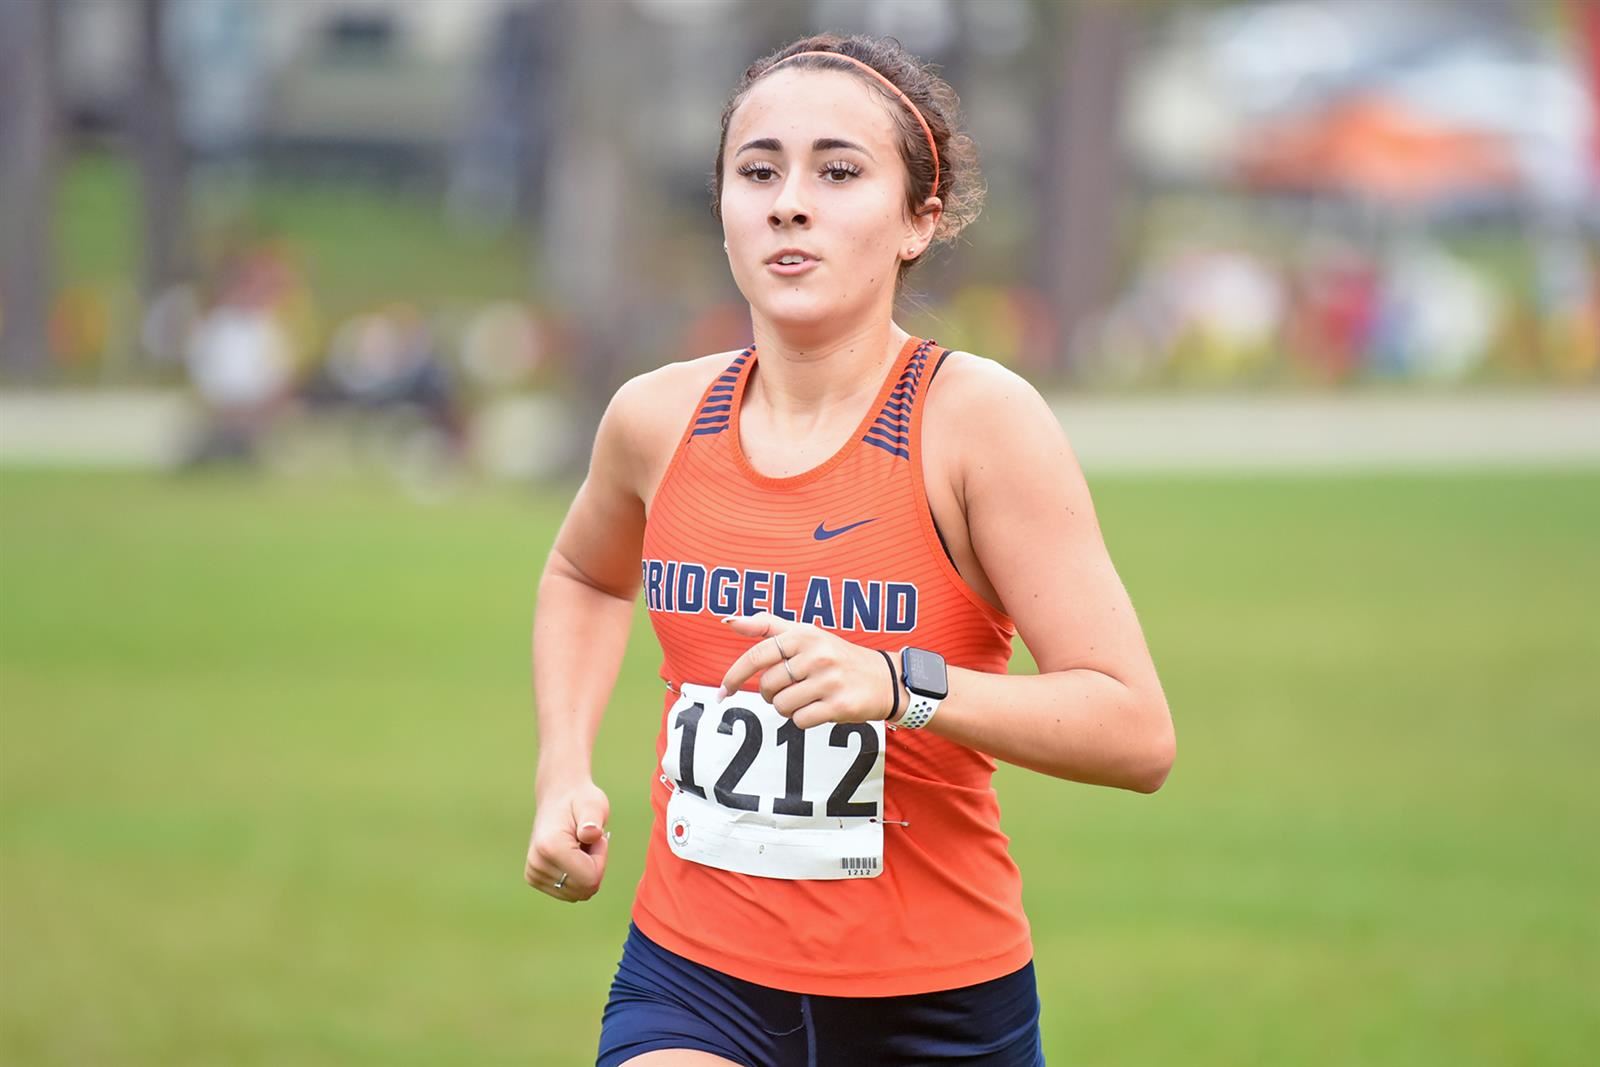 The Bridgeland girls’ cross country team finished 11th in Class 6A at the UIL state meet.